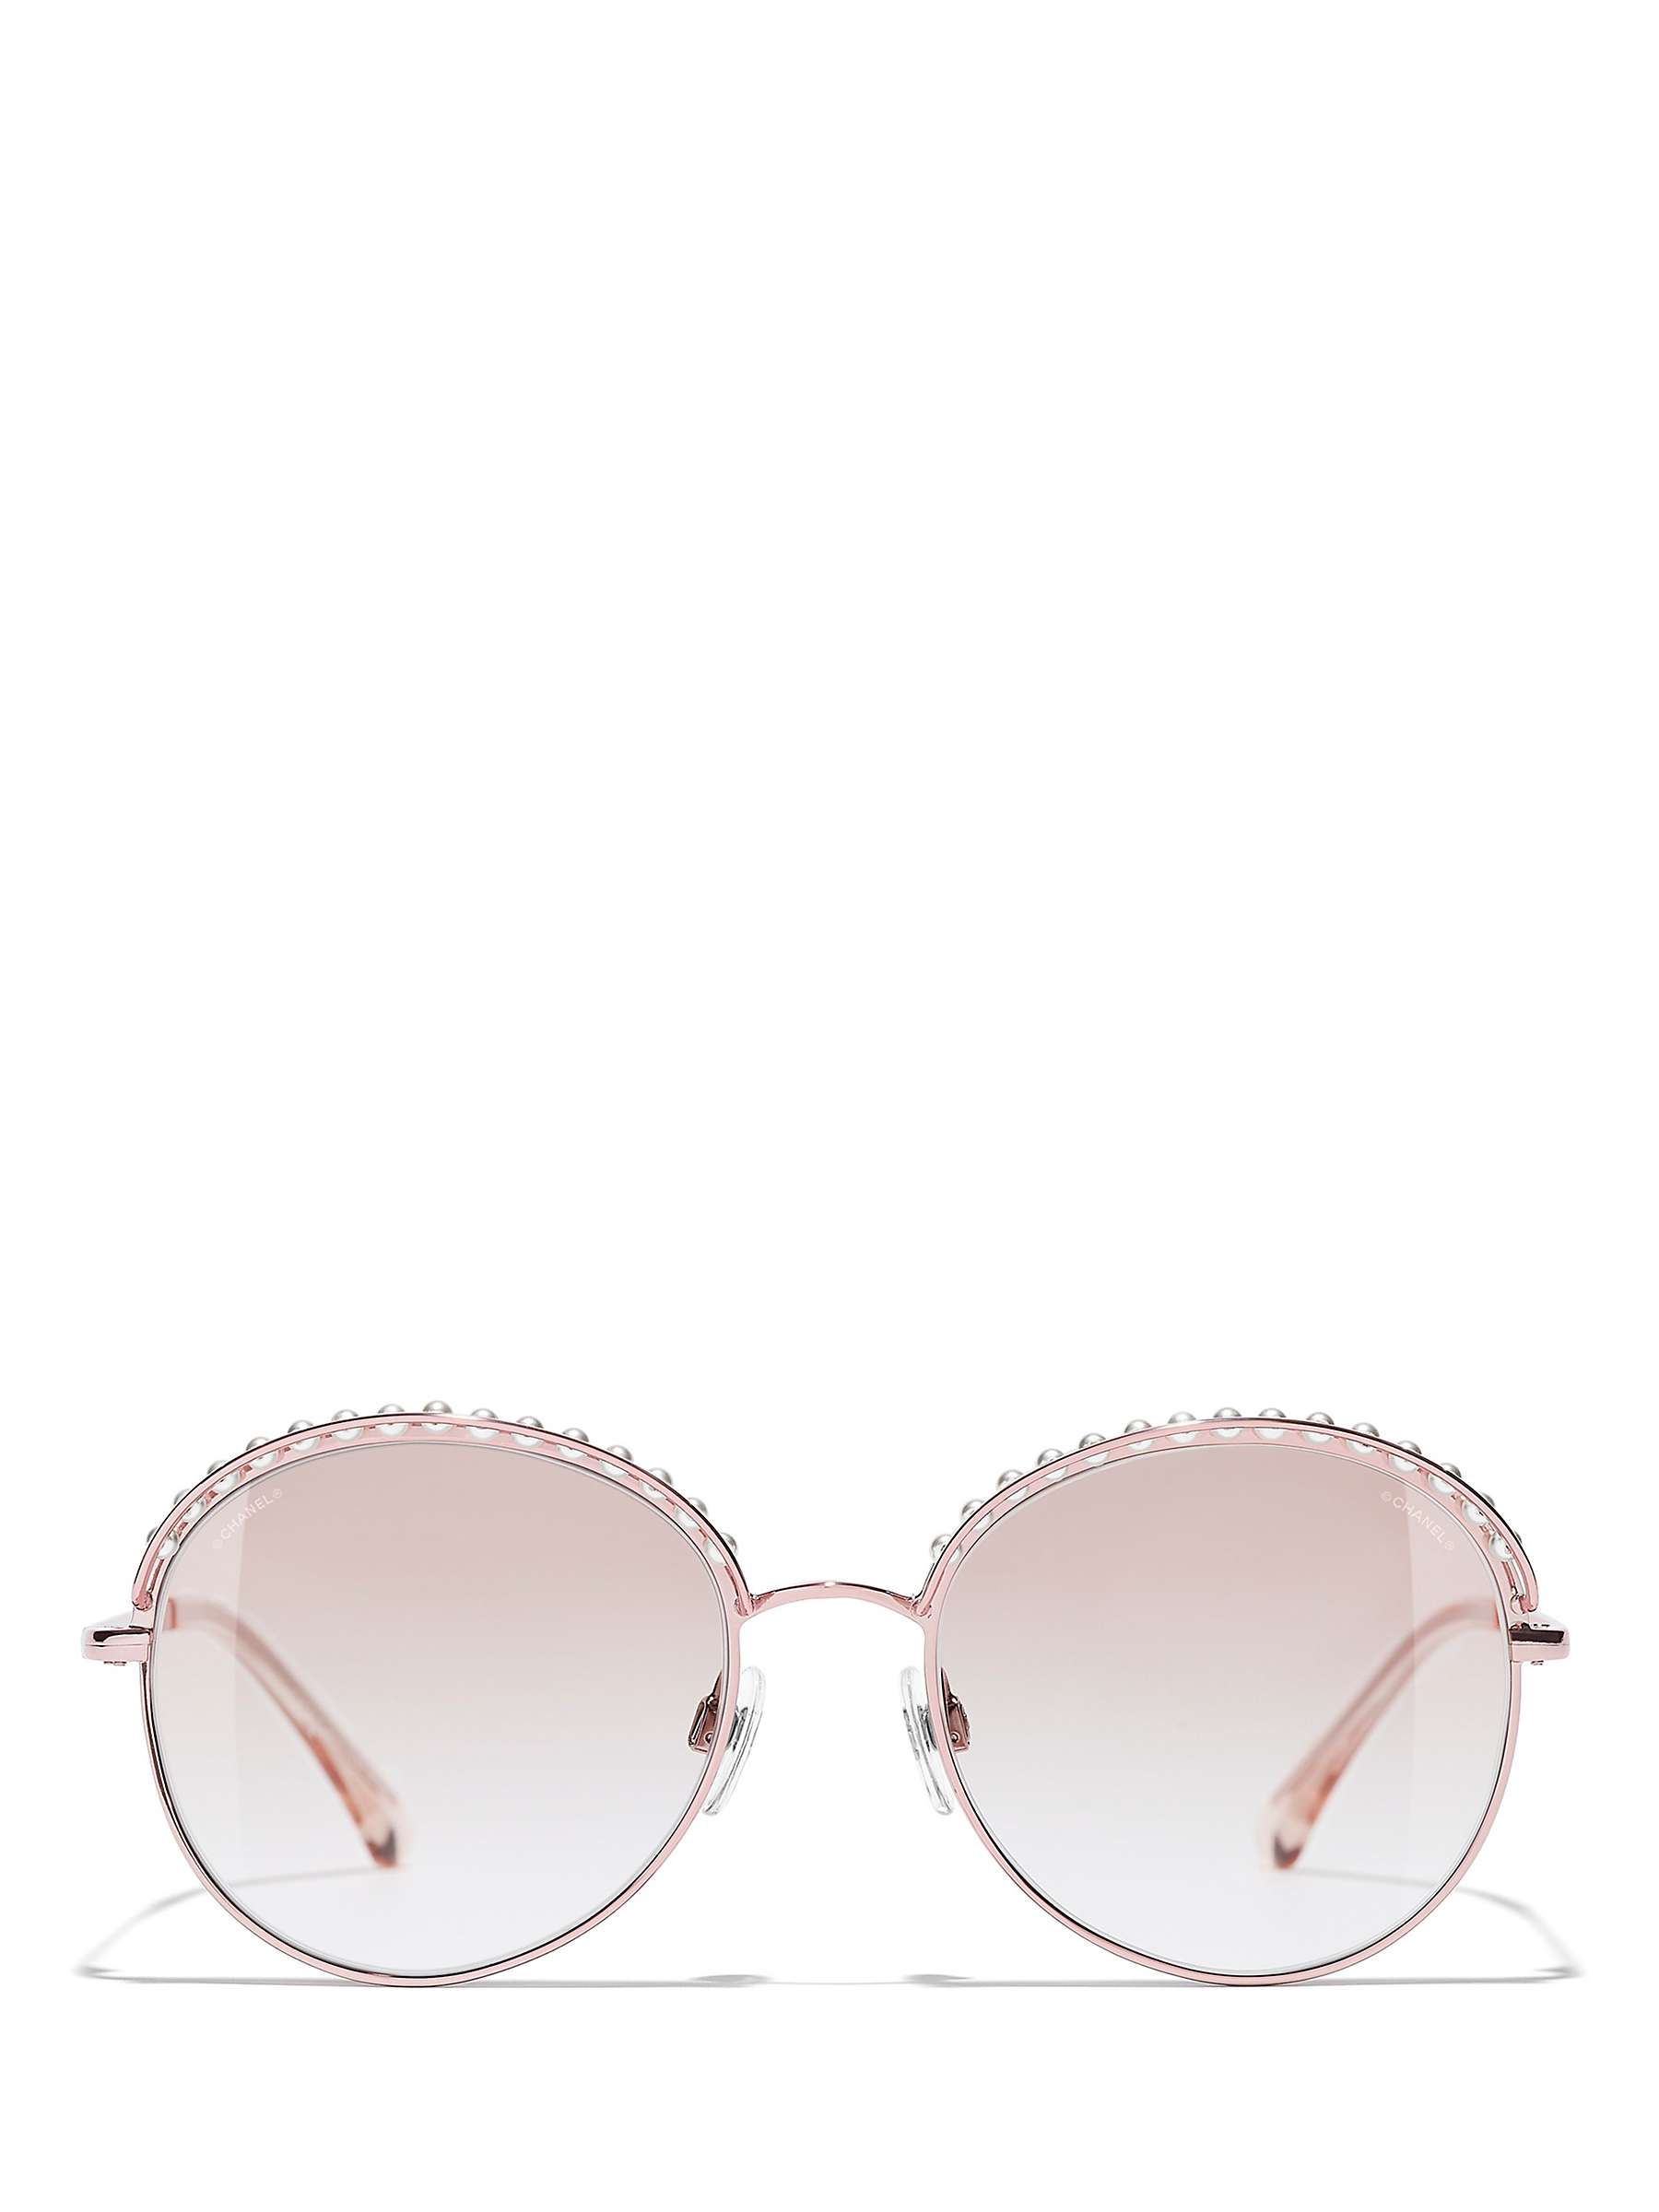 Buy CHANEL Round Sunglasses CH4247H Rose Gold/Blush Gradient Online at johnlewis.com